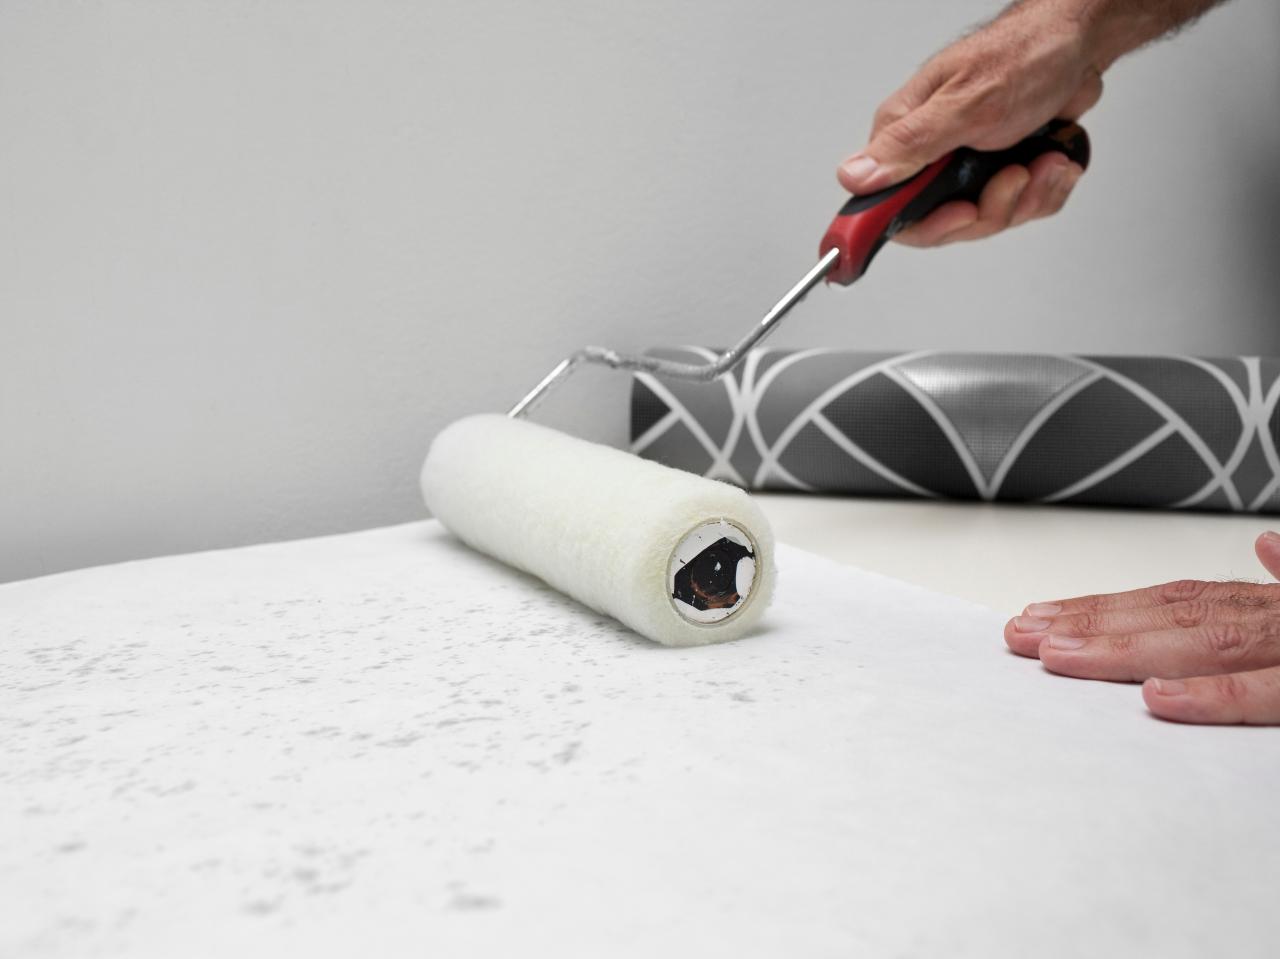 Apply Wallpaper Paste - Applying Wallpaper Paste With A Roller - 1280x959  Wallpaper 